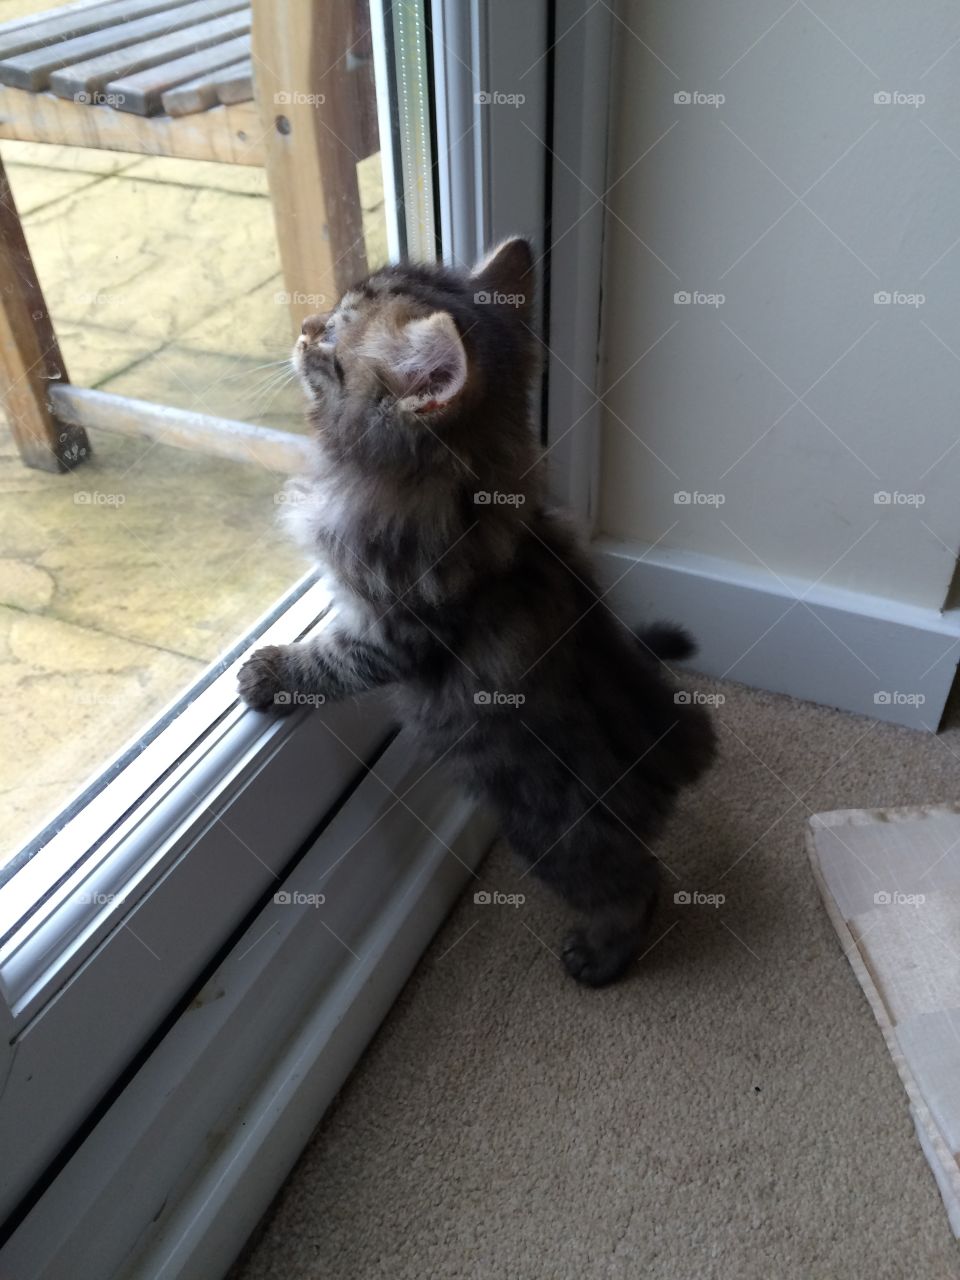 Maine coon tabby lynx kitten longing to see the outside world.